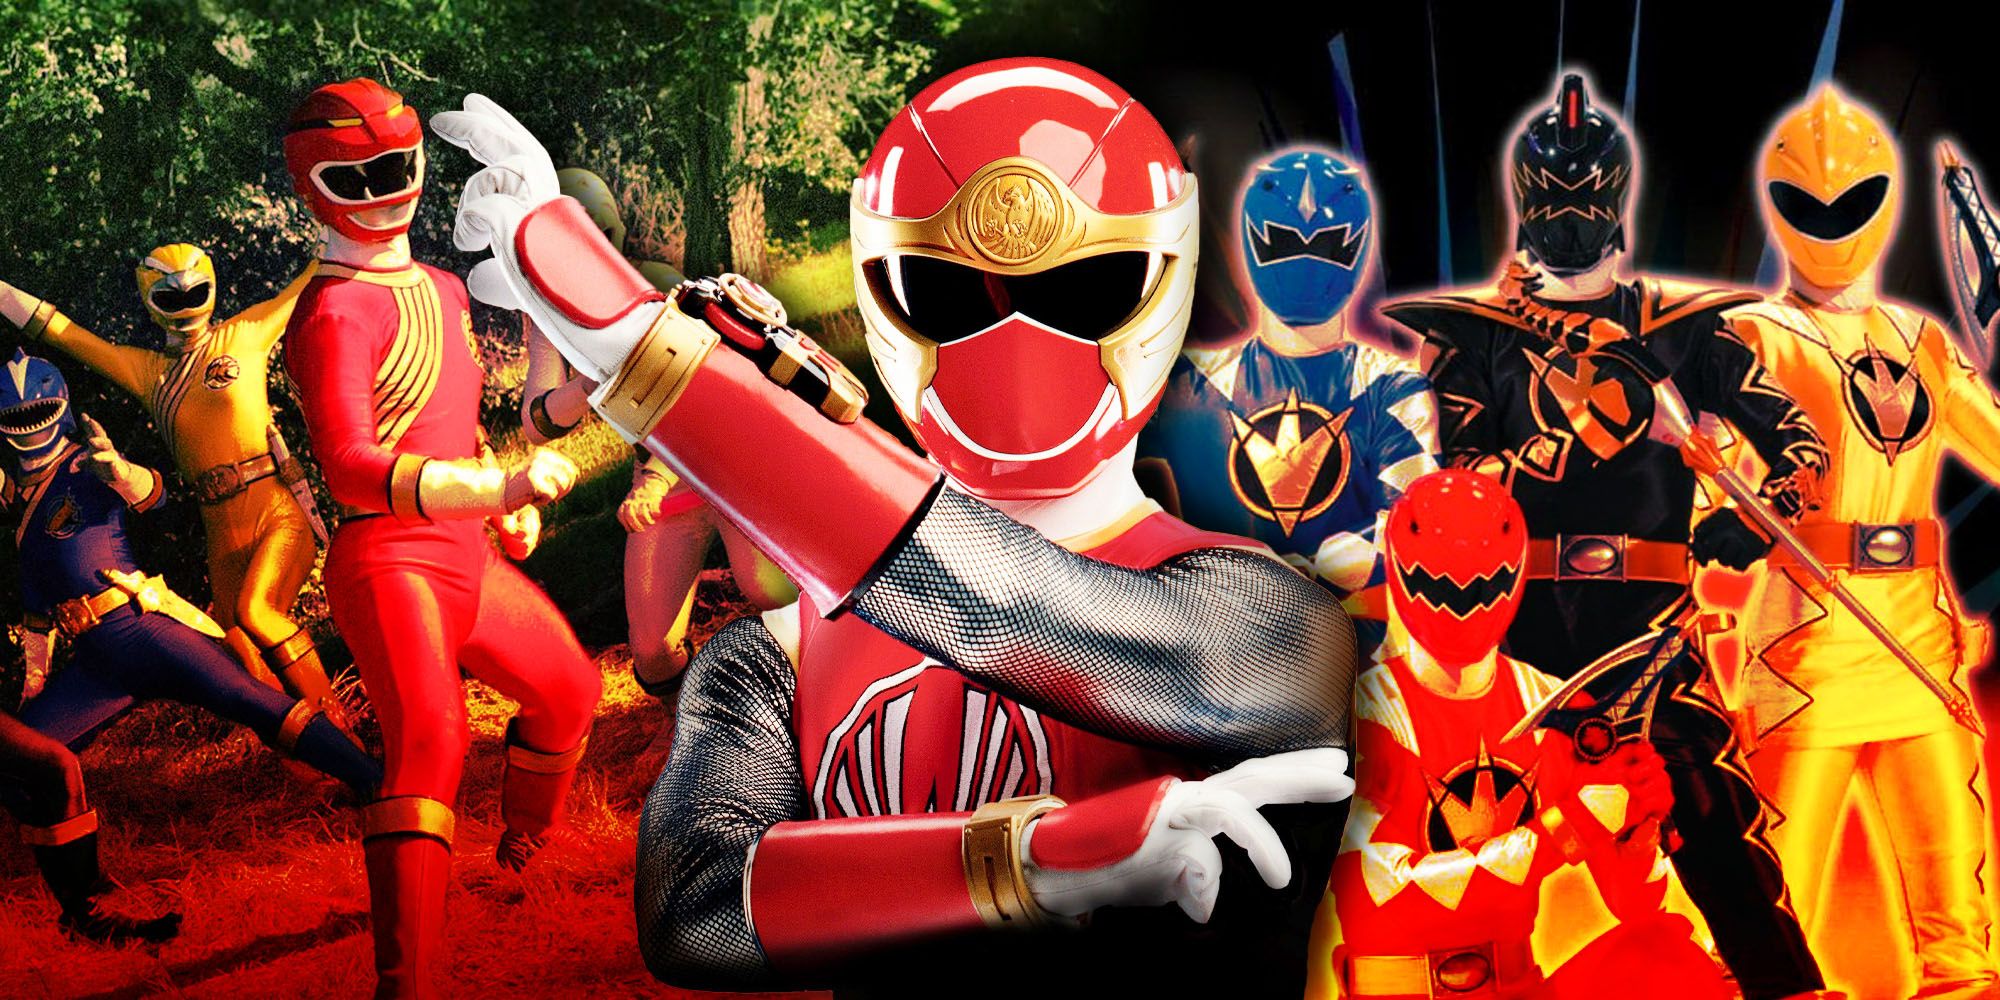 10 Power Rangers Team-Ups That Never Happened (But Would’ve Been Awesome)